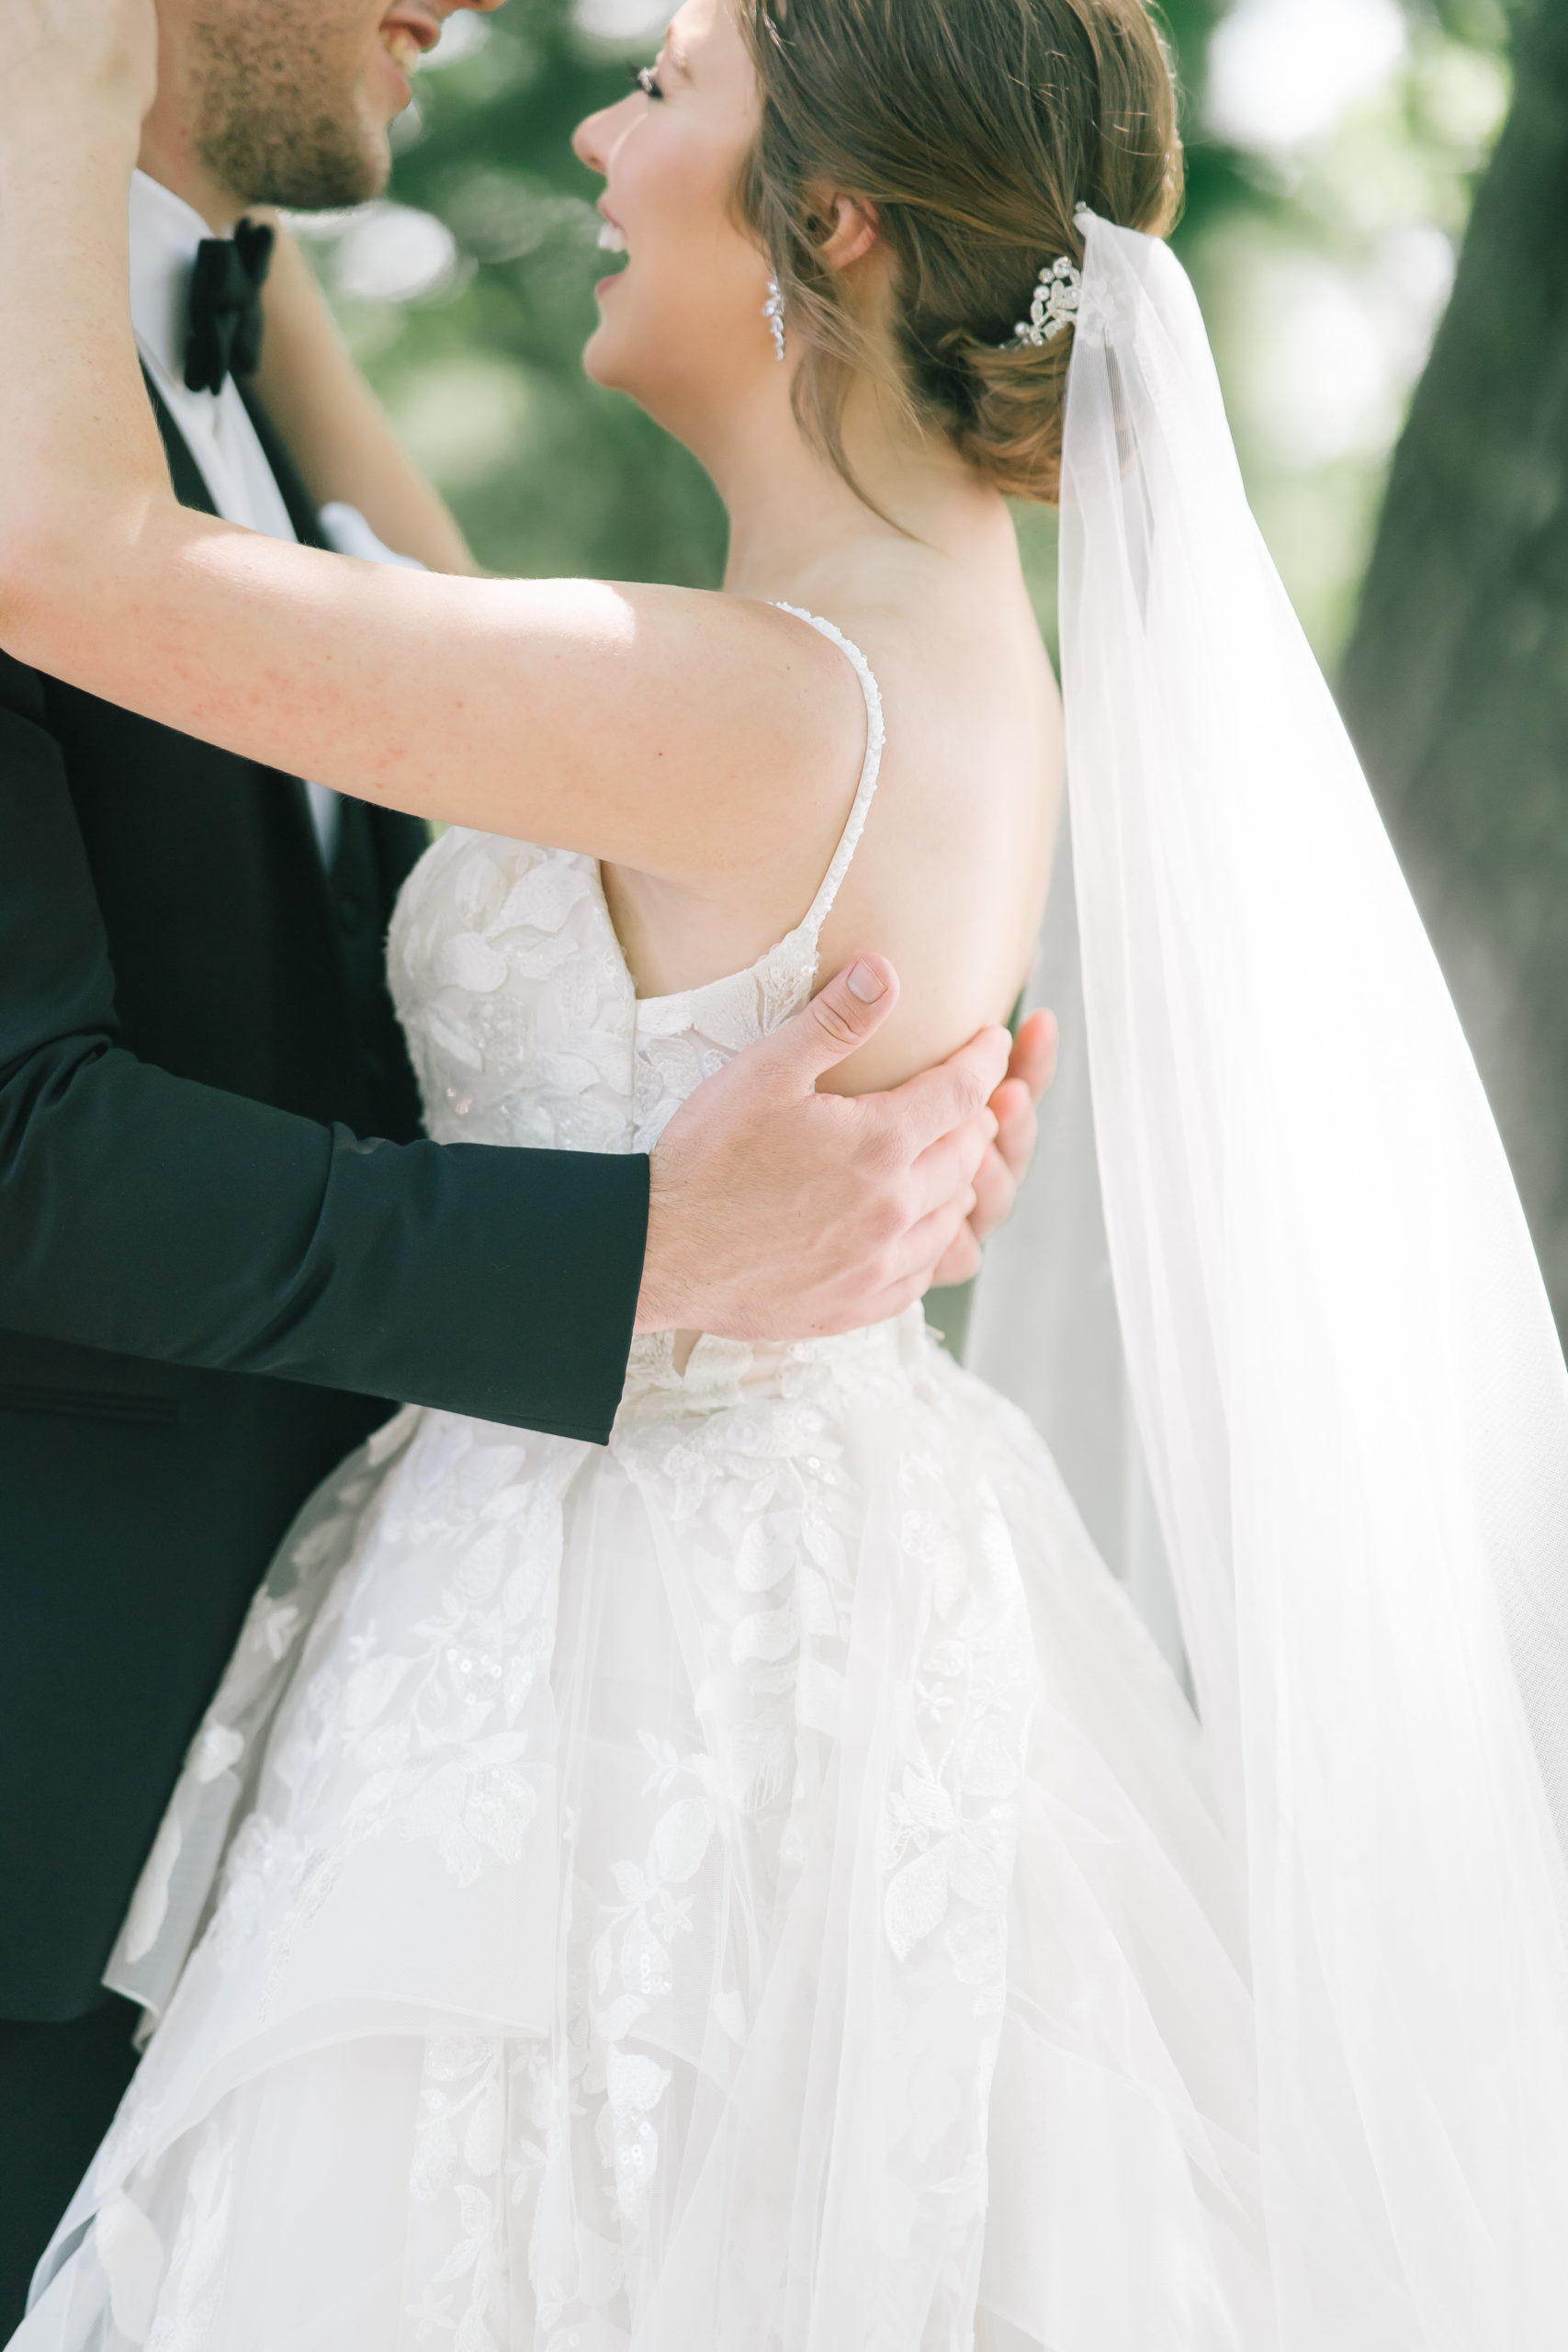 detail shot of groom holding his bride with a close up on the brides gown that is lined with tulle and lace for a classic summer wedding dress